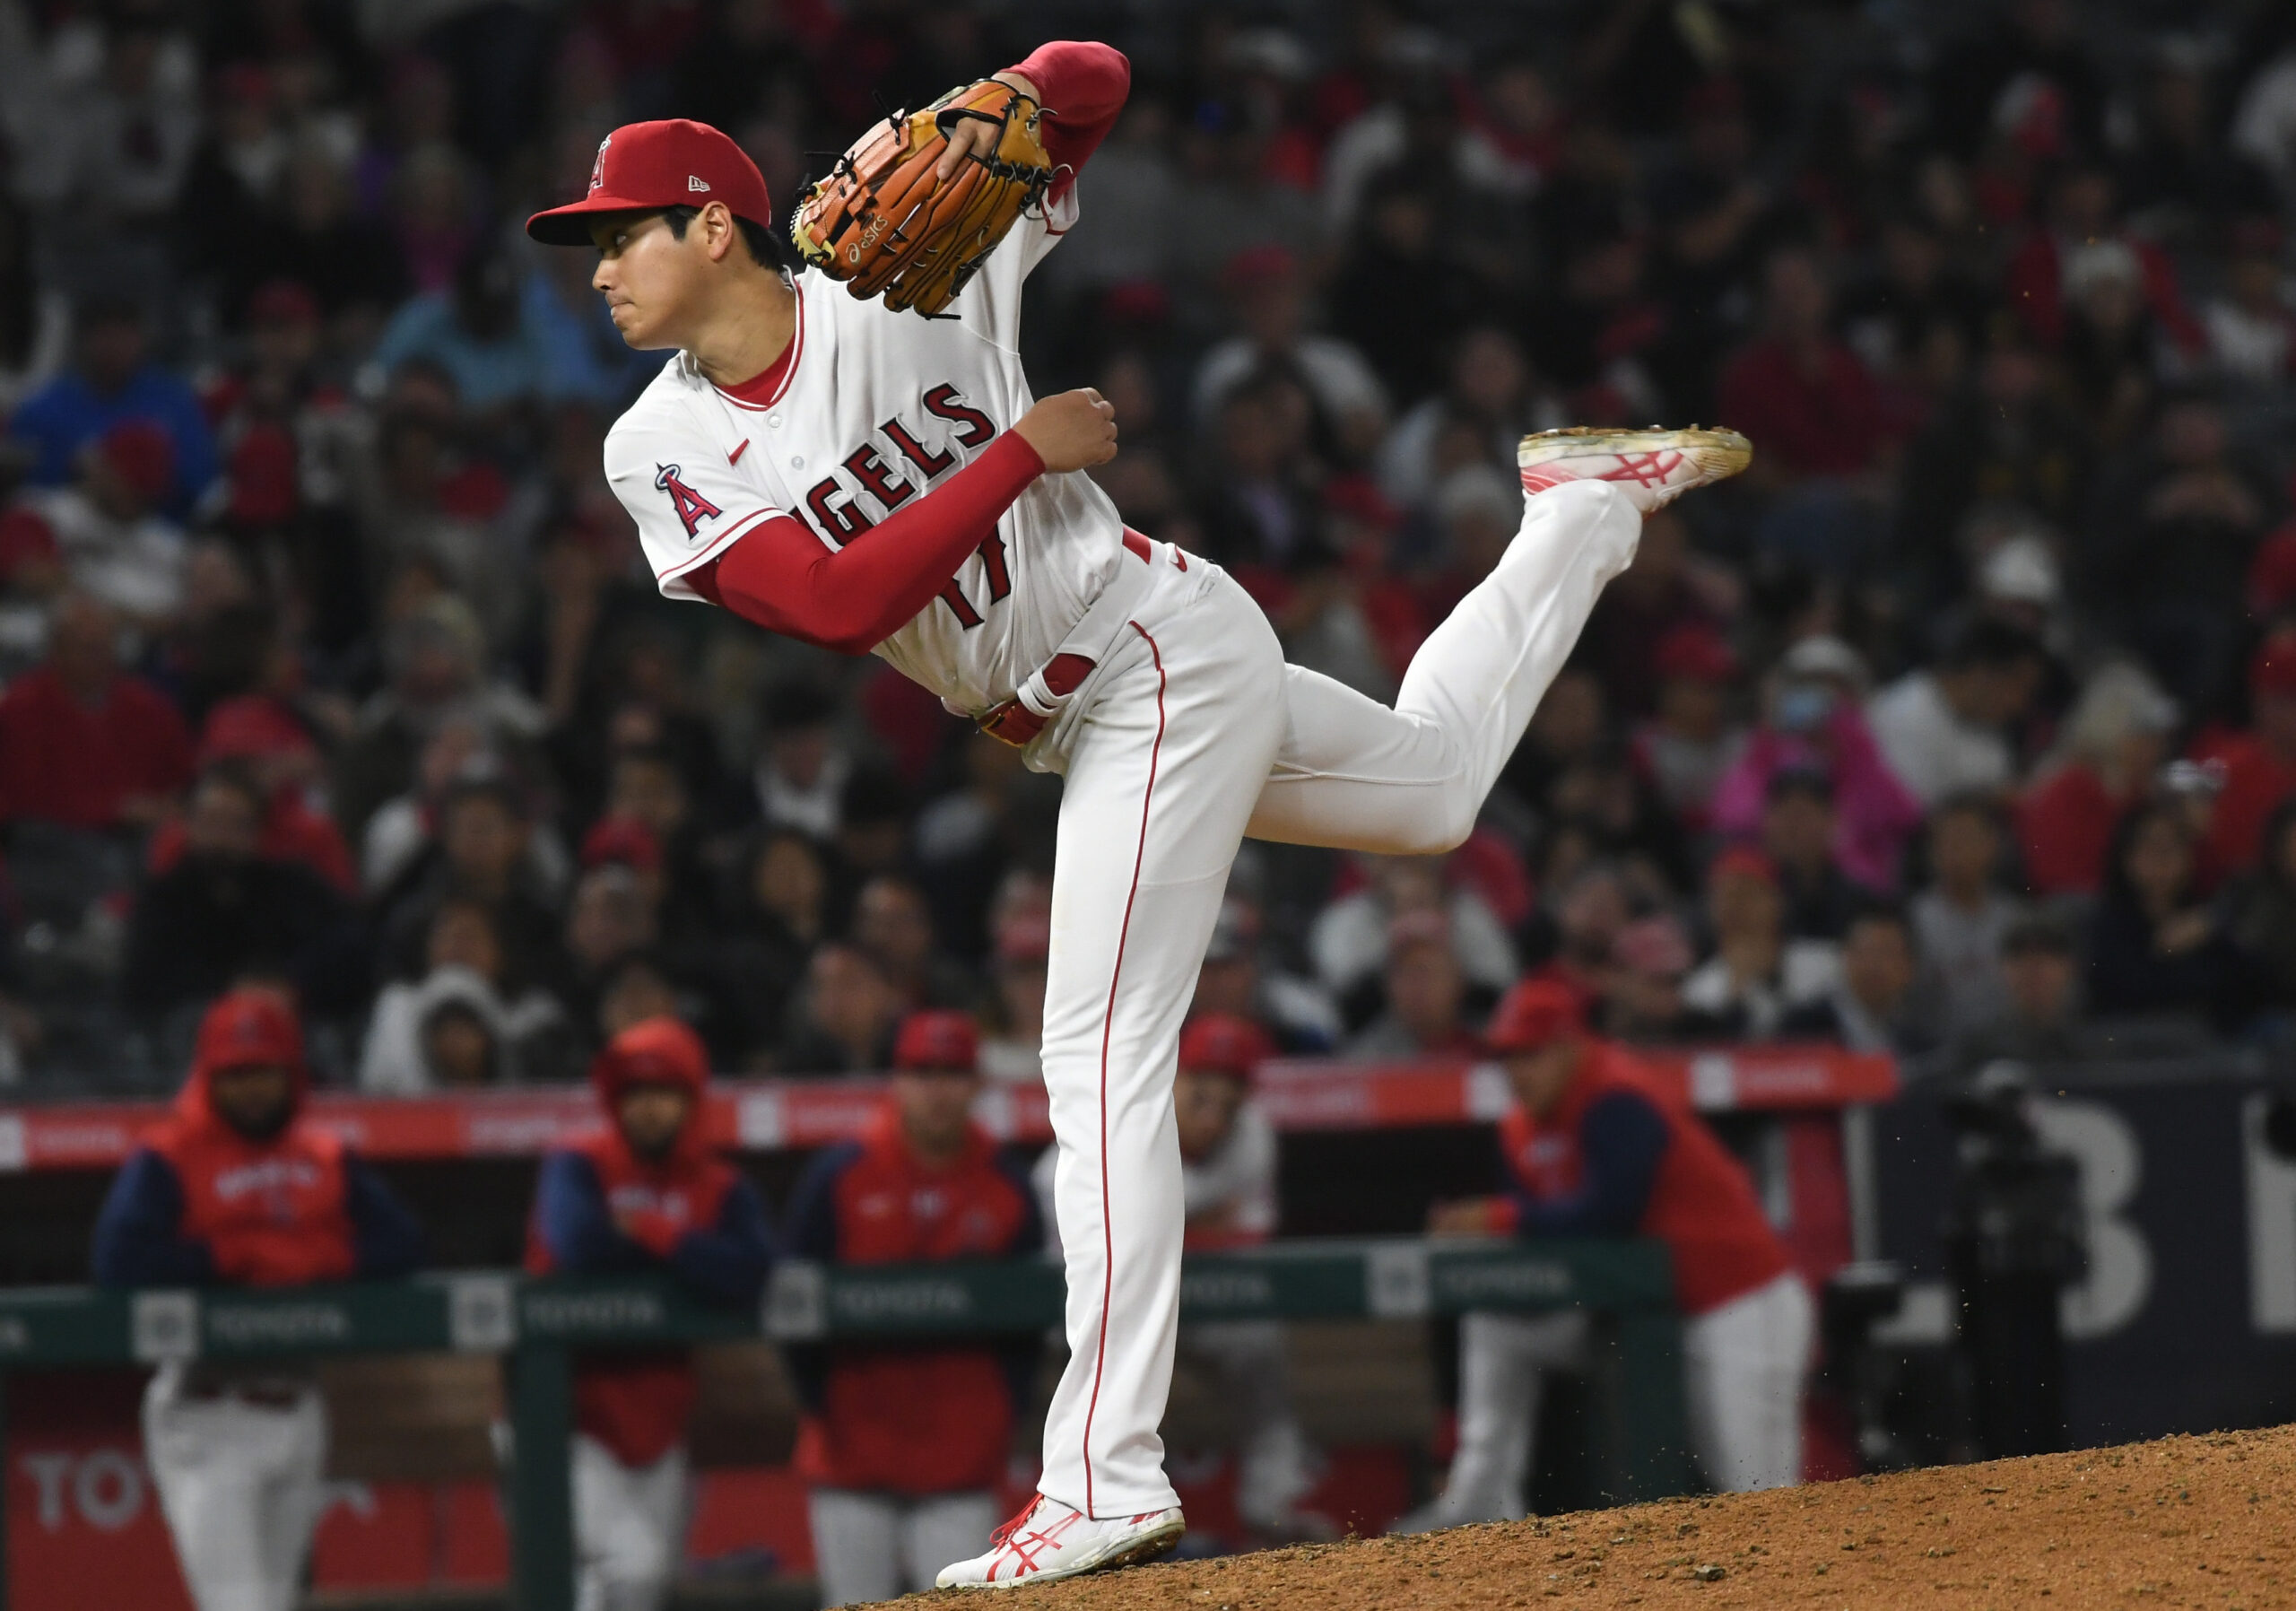 Angels News: Shohei Ohtani Won't Pitch In 2022 All-Star Game - Angels Nation